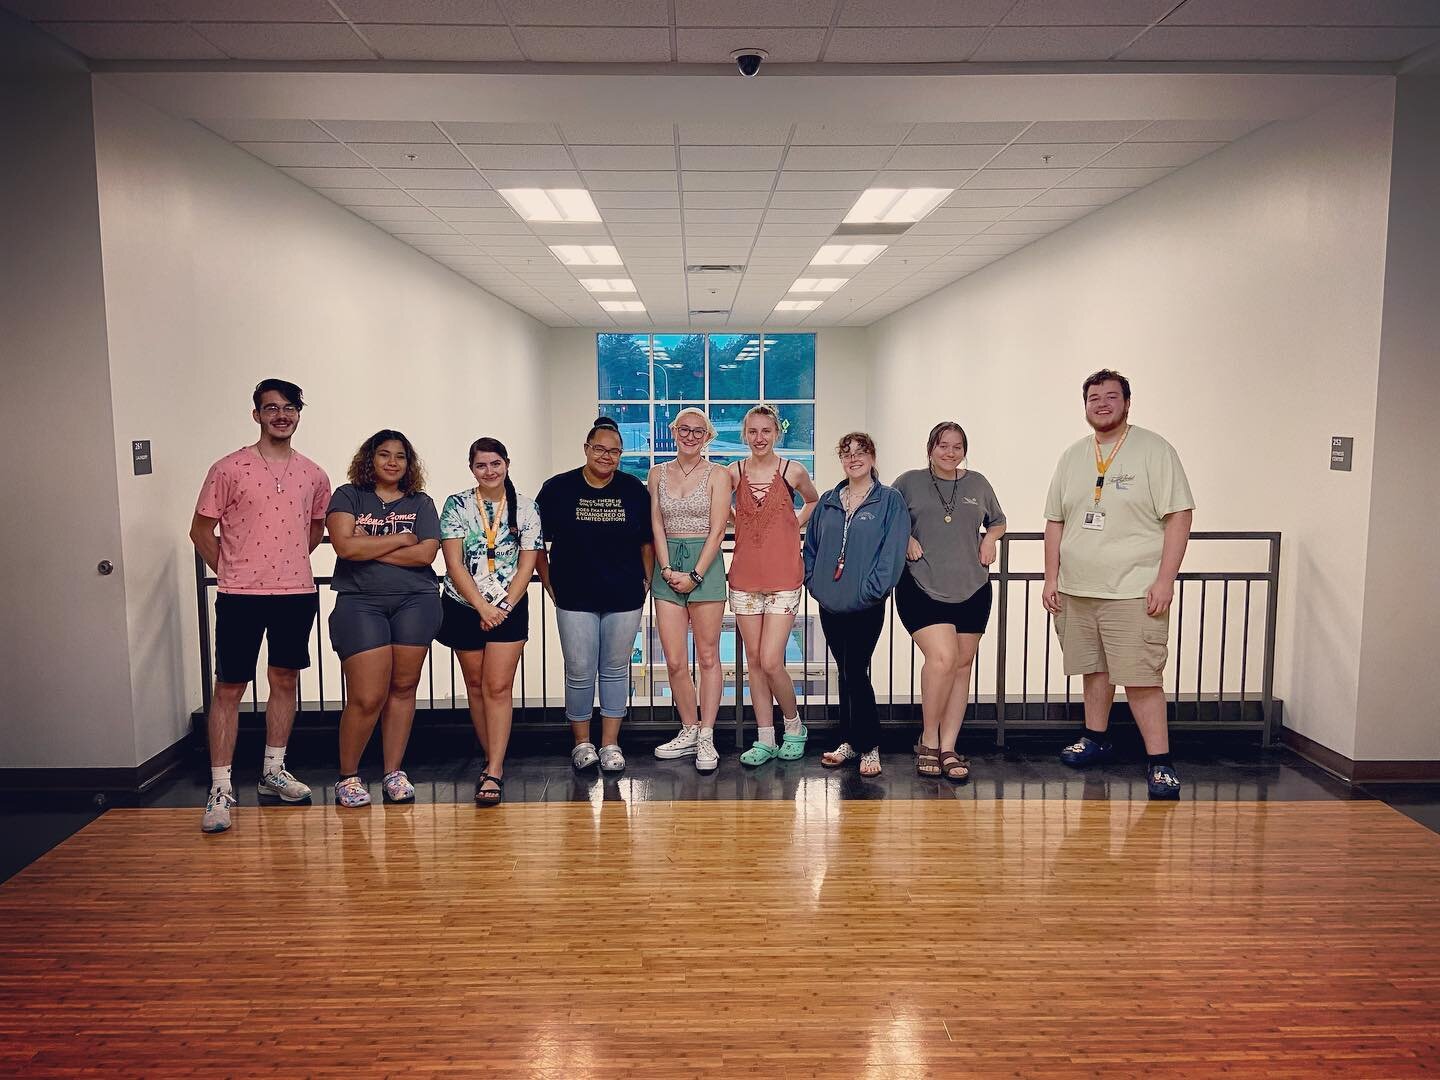 And with that, the 2022 UB Summer Program has come to a close. The dorms are now empty and the hallways are not silent. Thank you again to all of our phenomenal students on making our first residential summer program in three years so memorable. 
And